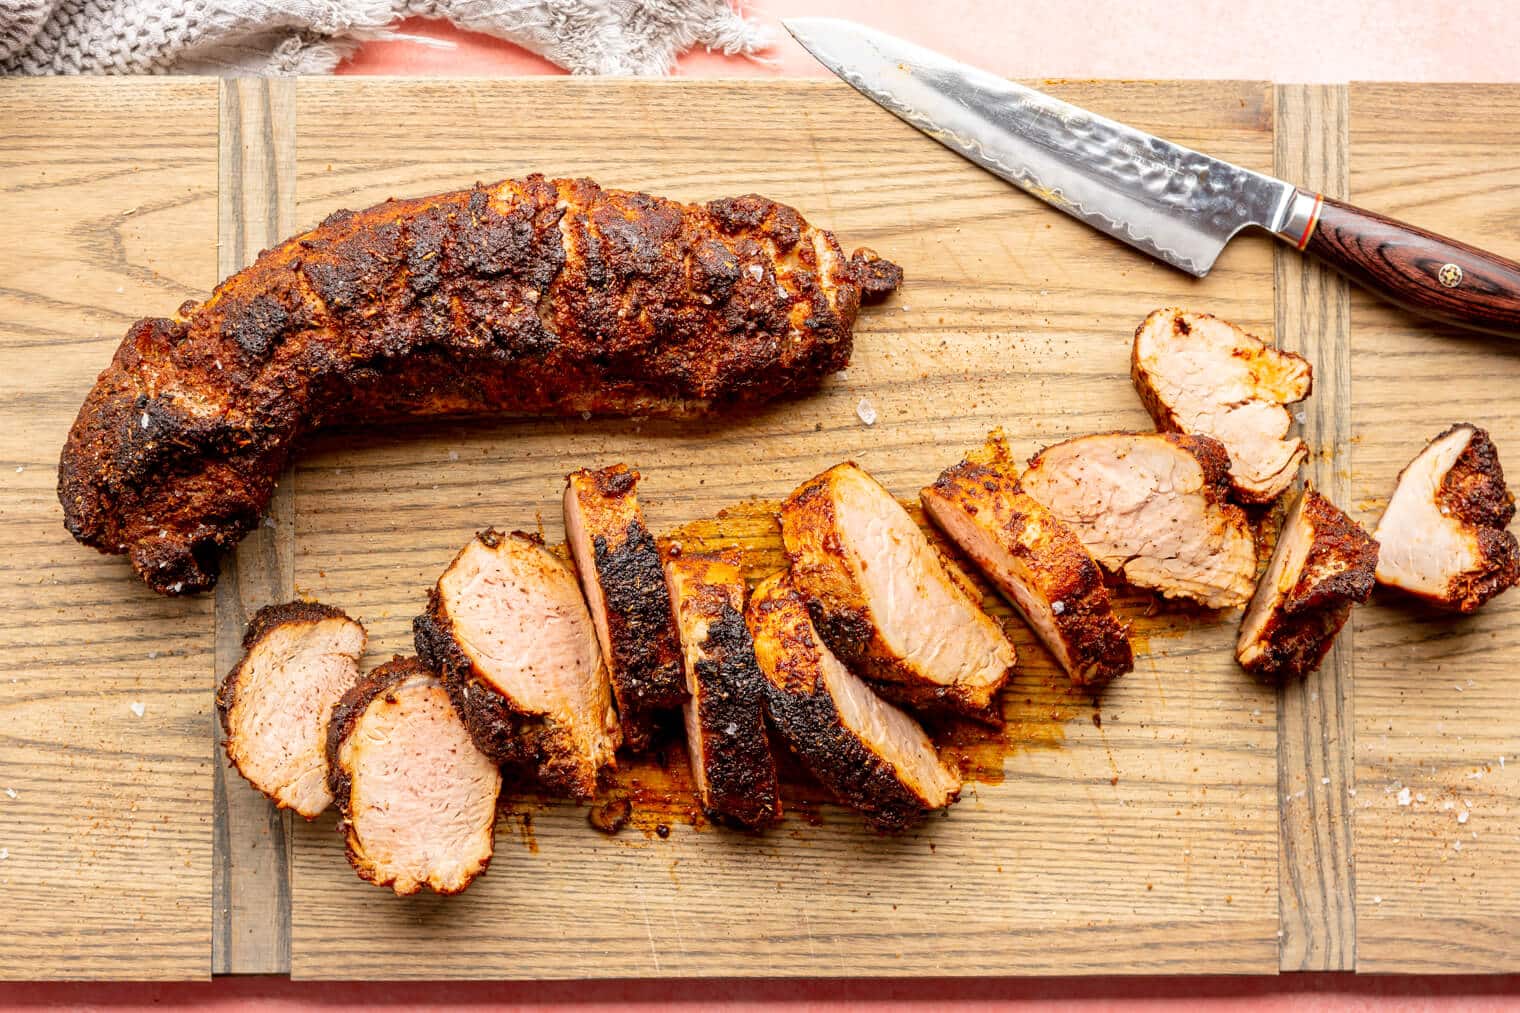 A rectangle, wooden cutting board with two roasted pork tenderloins. One is sliced into medallions, and the other is whole. Both have a dark chili rub on the exterior.